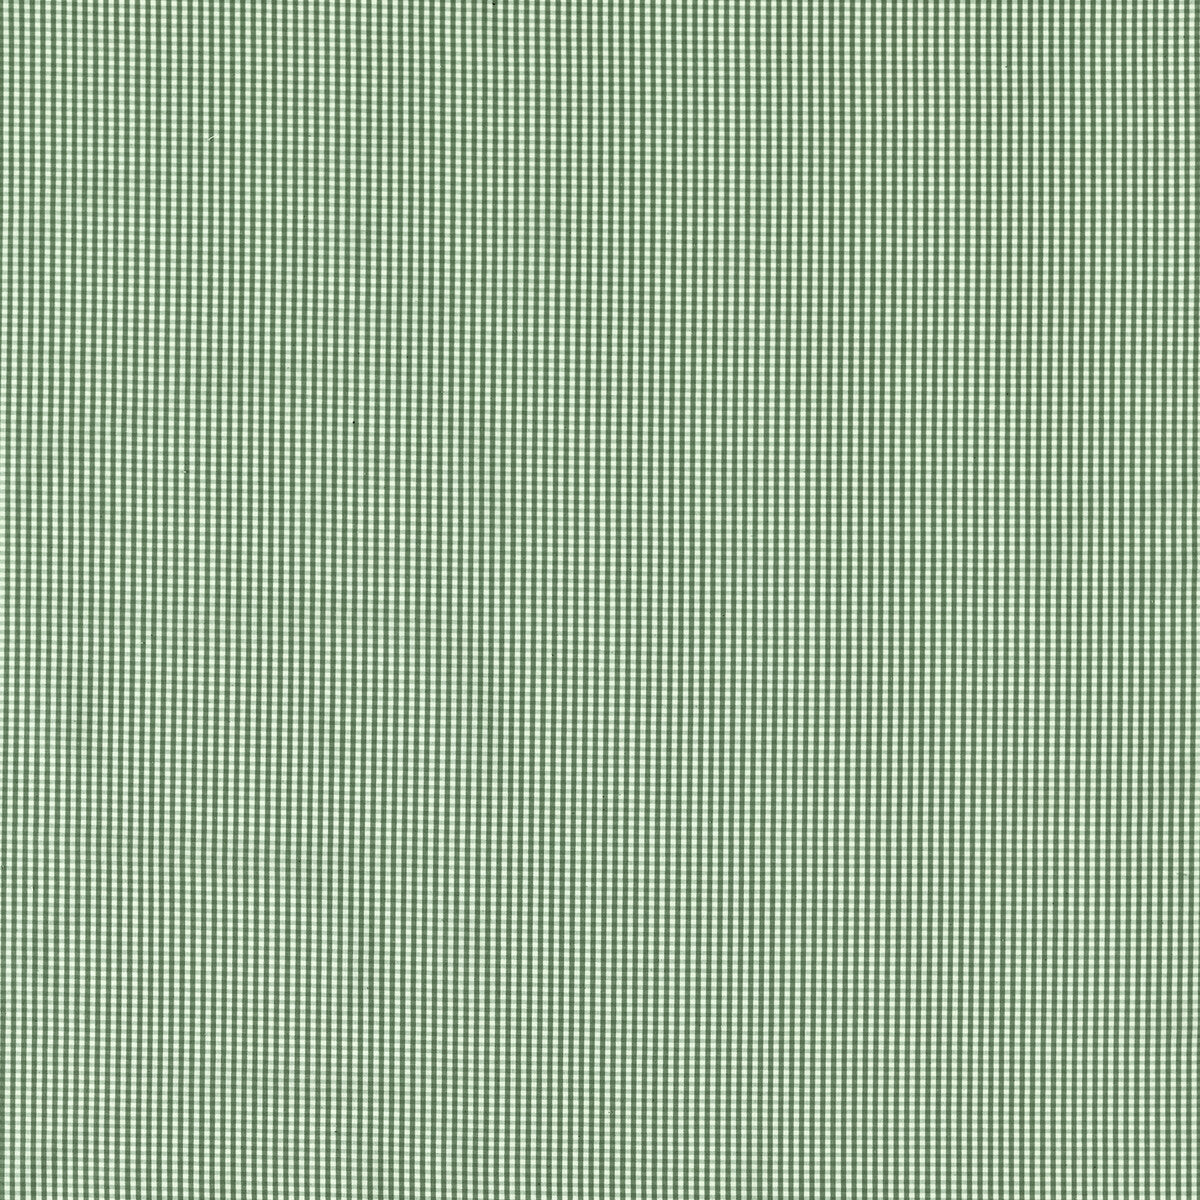 Windsor fabric in racing green color - pattern F1505/08.CAC.0 - by Clarke And Clarke in the Clarke &amp; Clarke Edgeworth collection